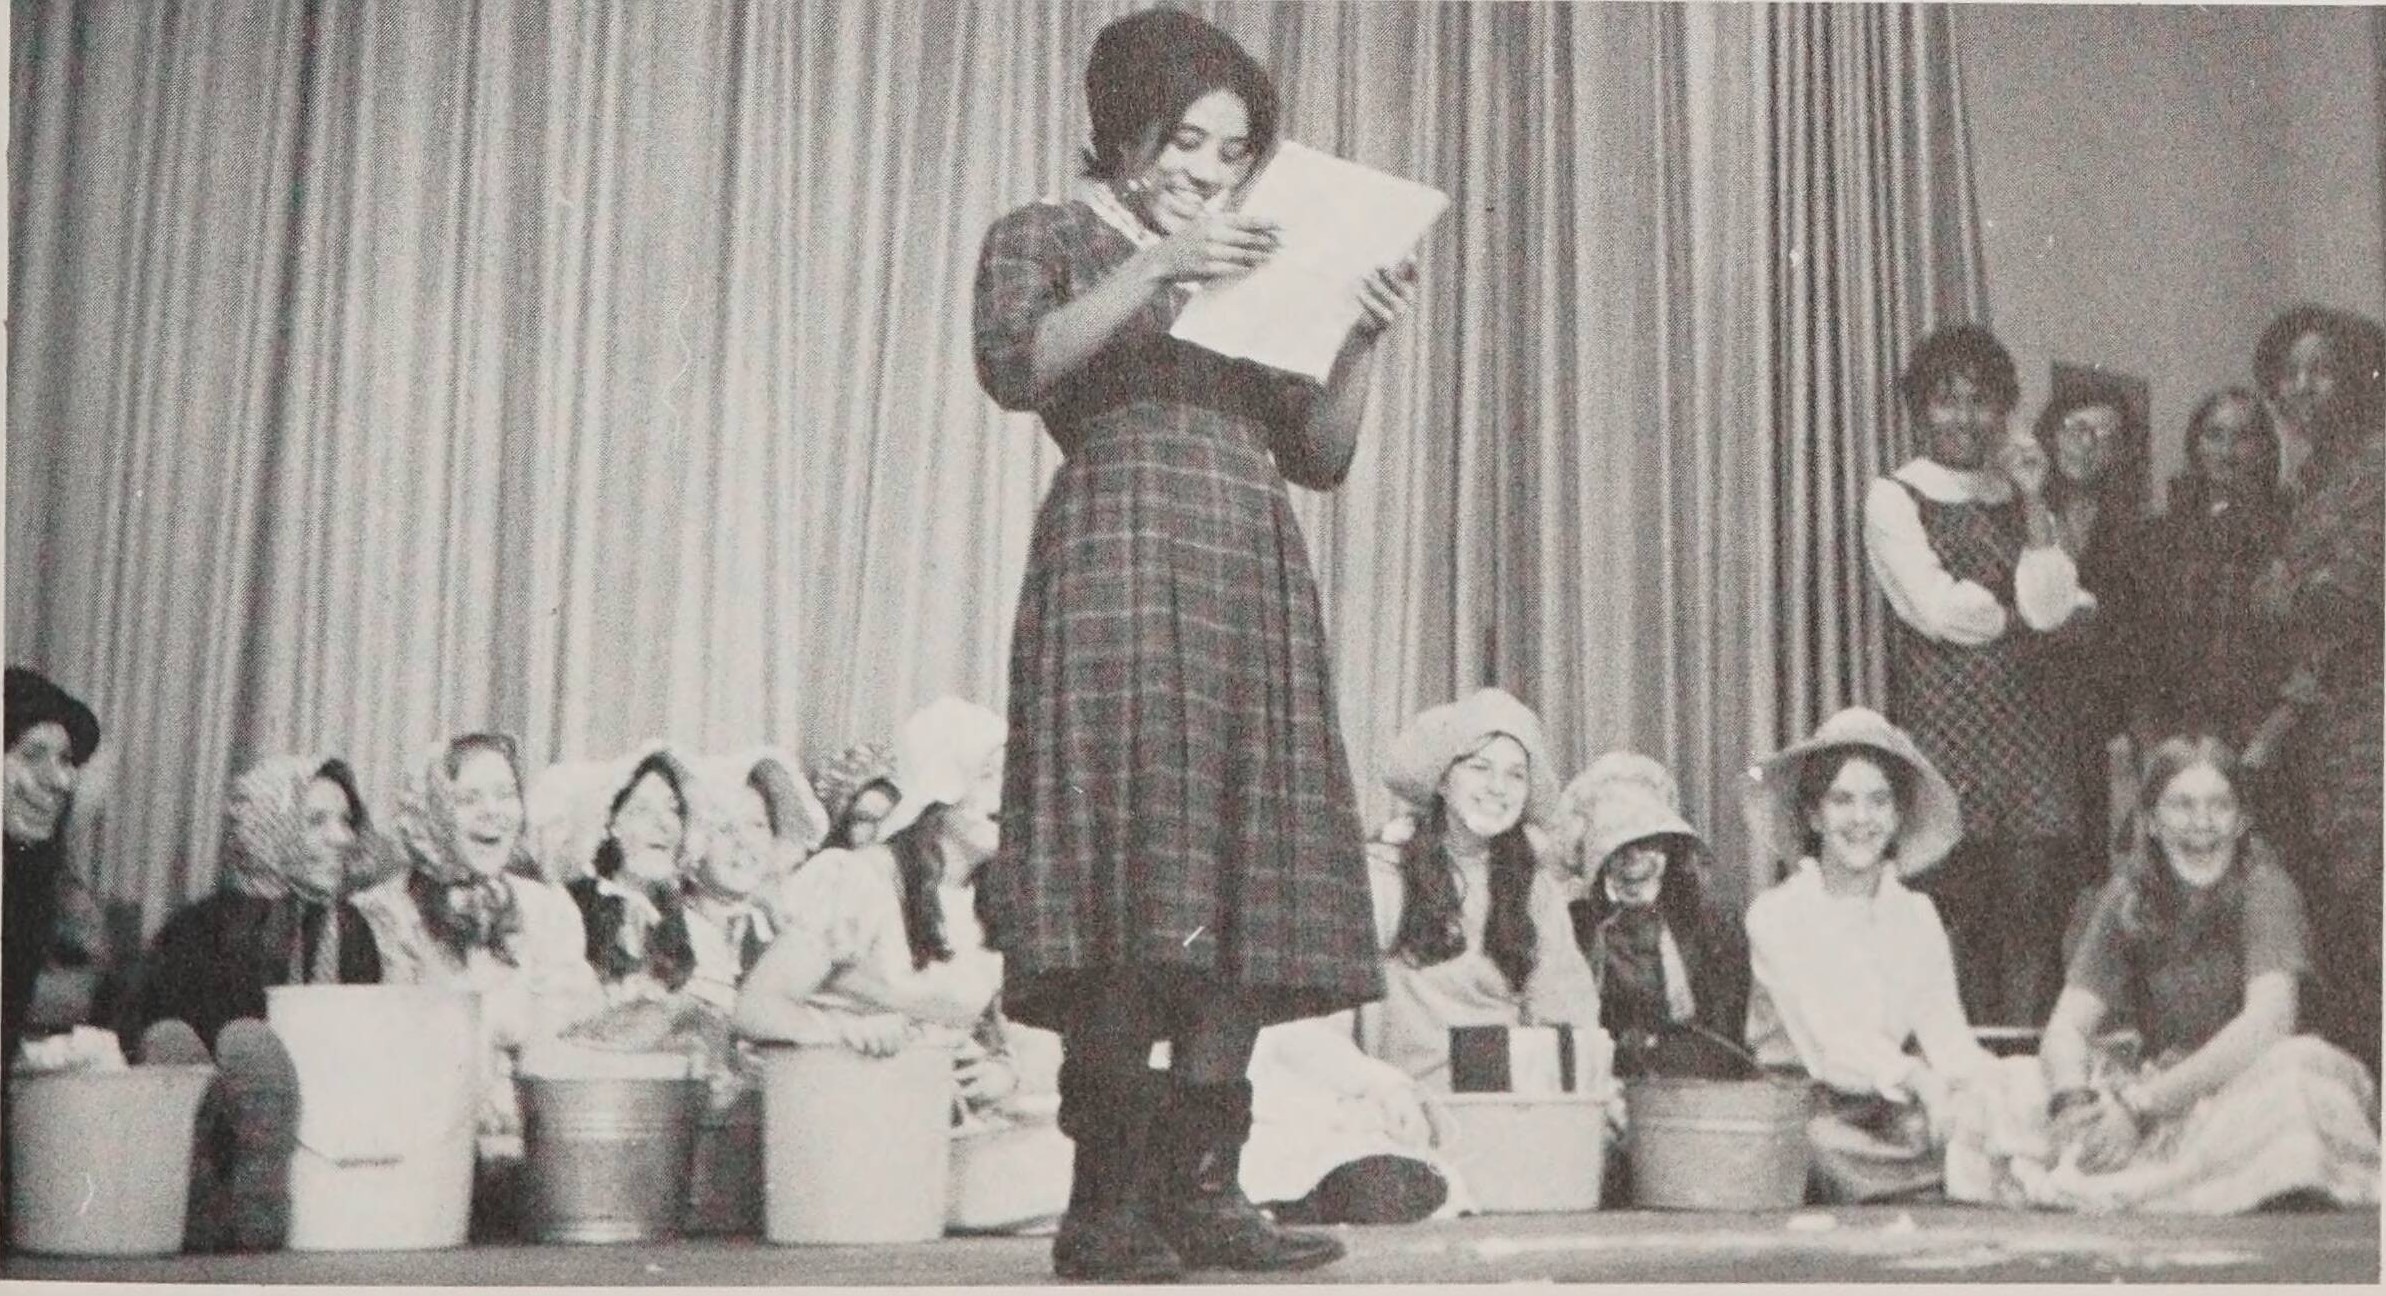 Teenagers on a stage for the F. H. A. initiation. One teen is in the center of the stage holding a piece of paper while others sit behind her with water pales and bonnets on their heads.